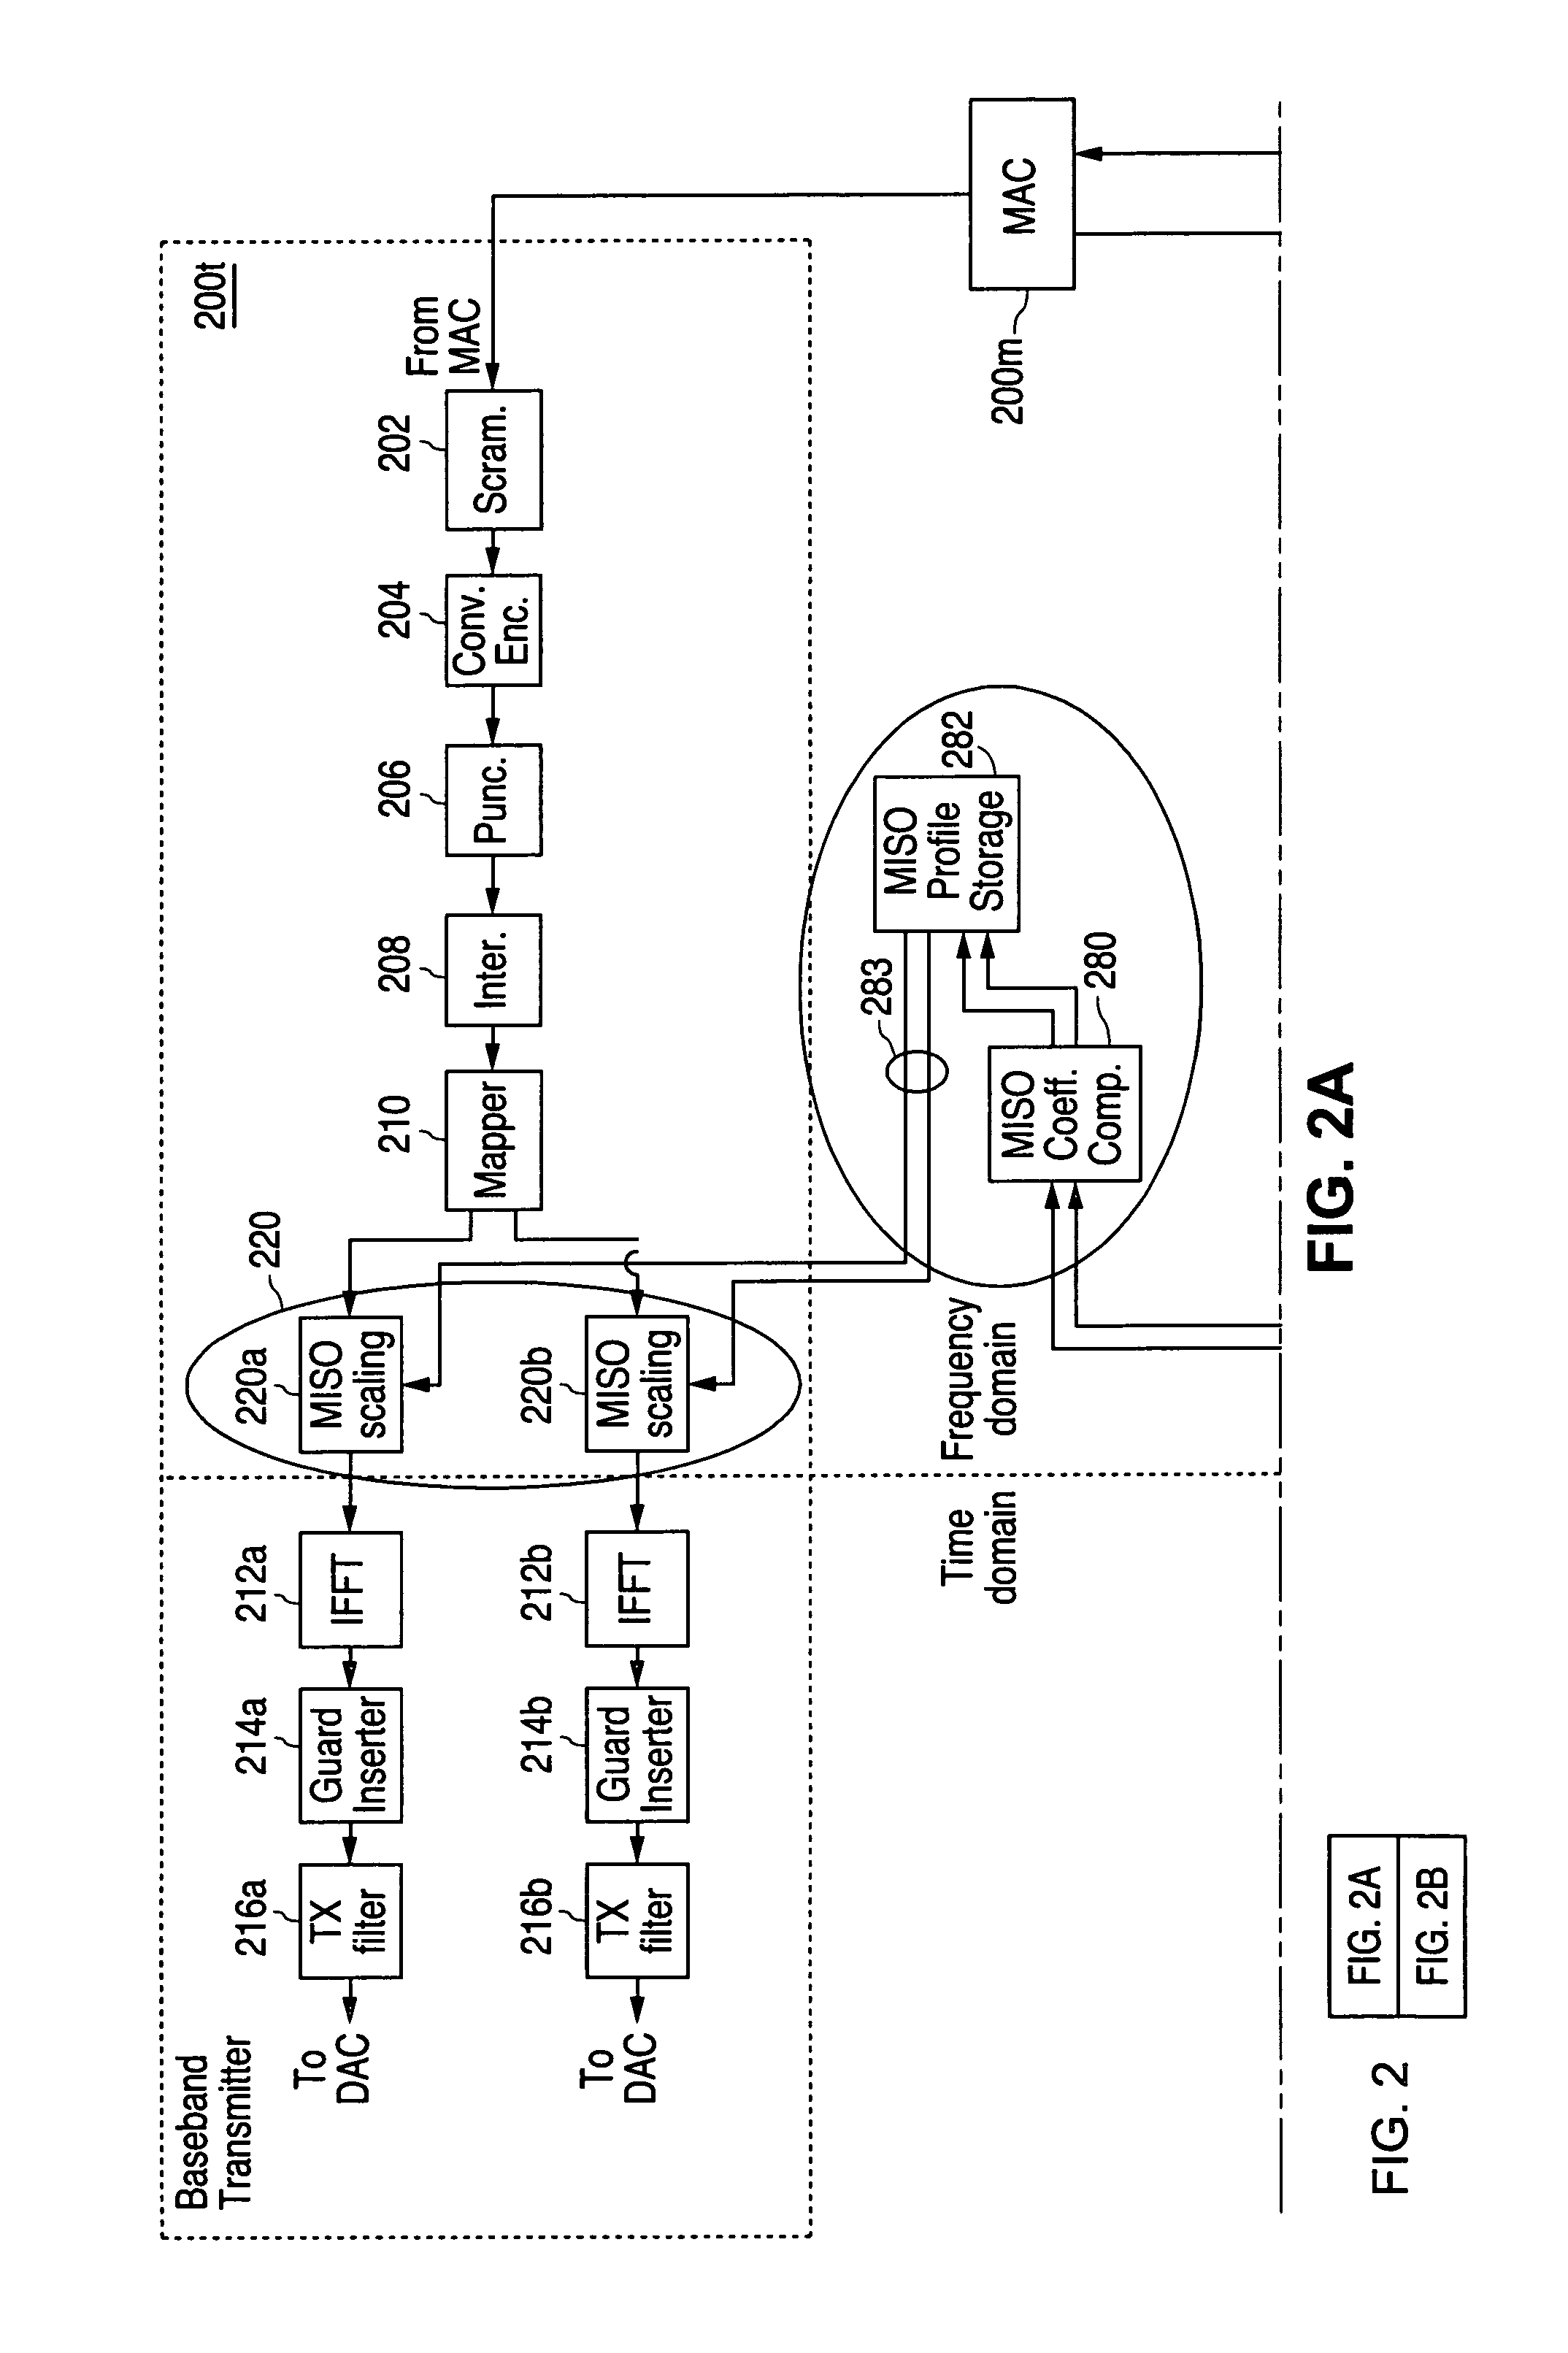 Apparatus for generating signal gain coefficients for a SIMO/MISO transceiver for providing packet data communication with a SISO transceiver